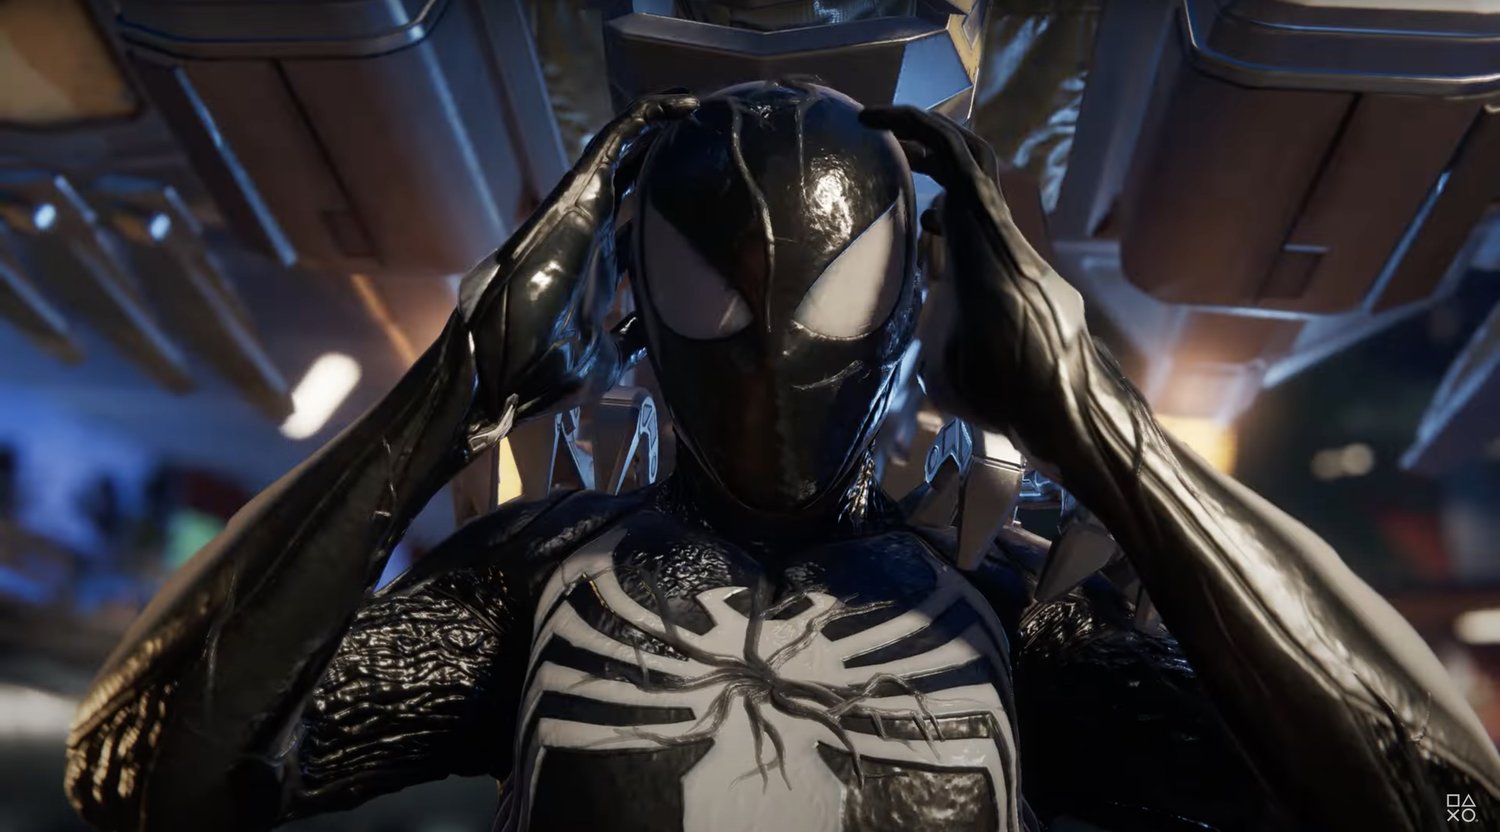 Insomniac's 'Spider-Man 2': Venom Creeps into the First Trailer Reveal  During Playstation Showcase